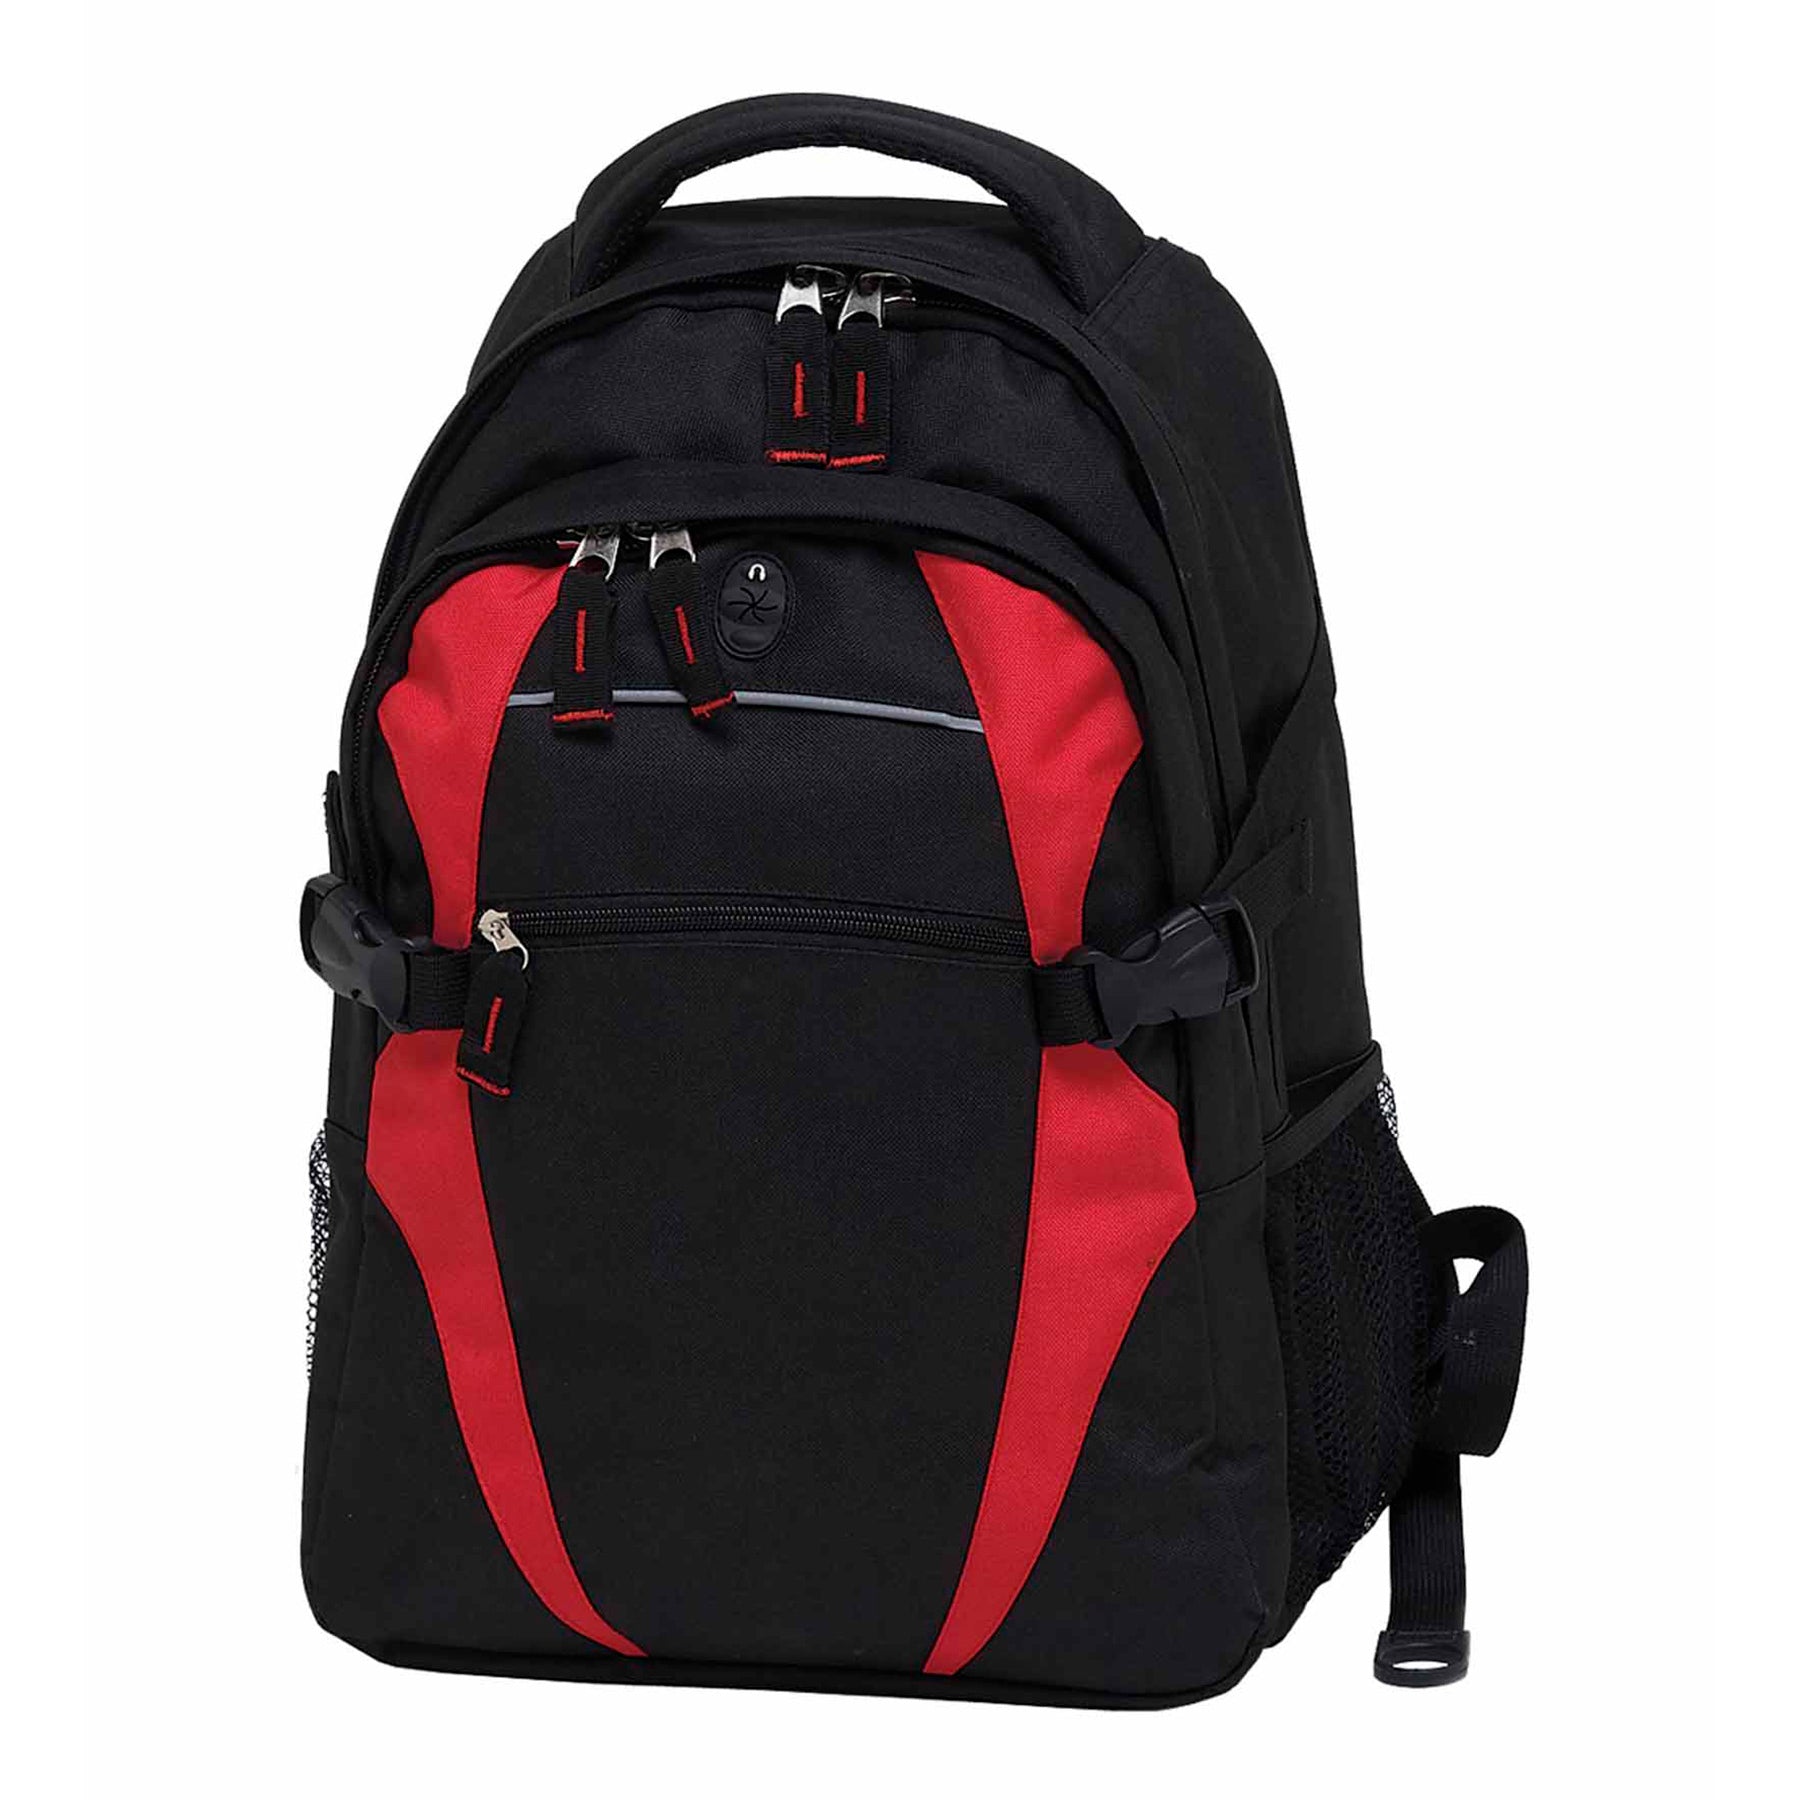 House of Uniforms The Spliced Zenith Backpack Gear for Life Black/Red